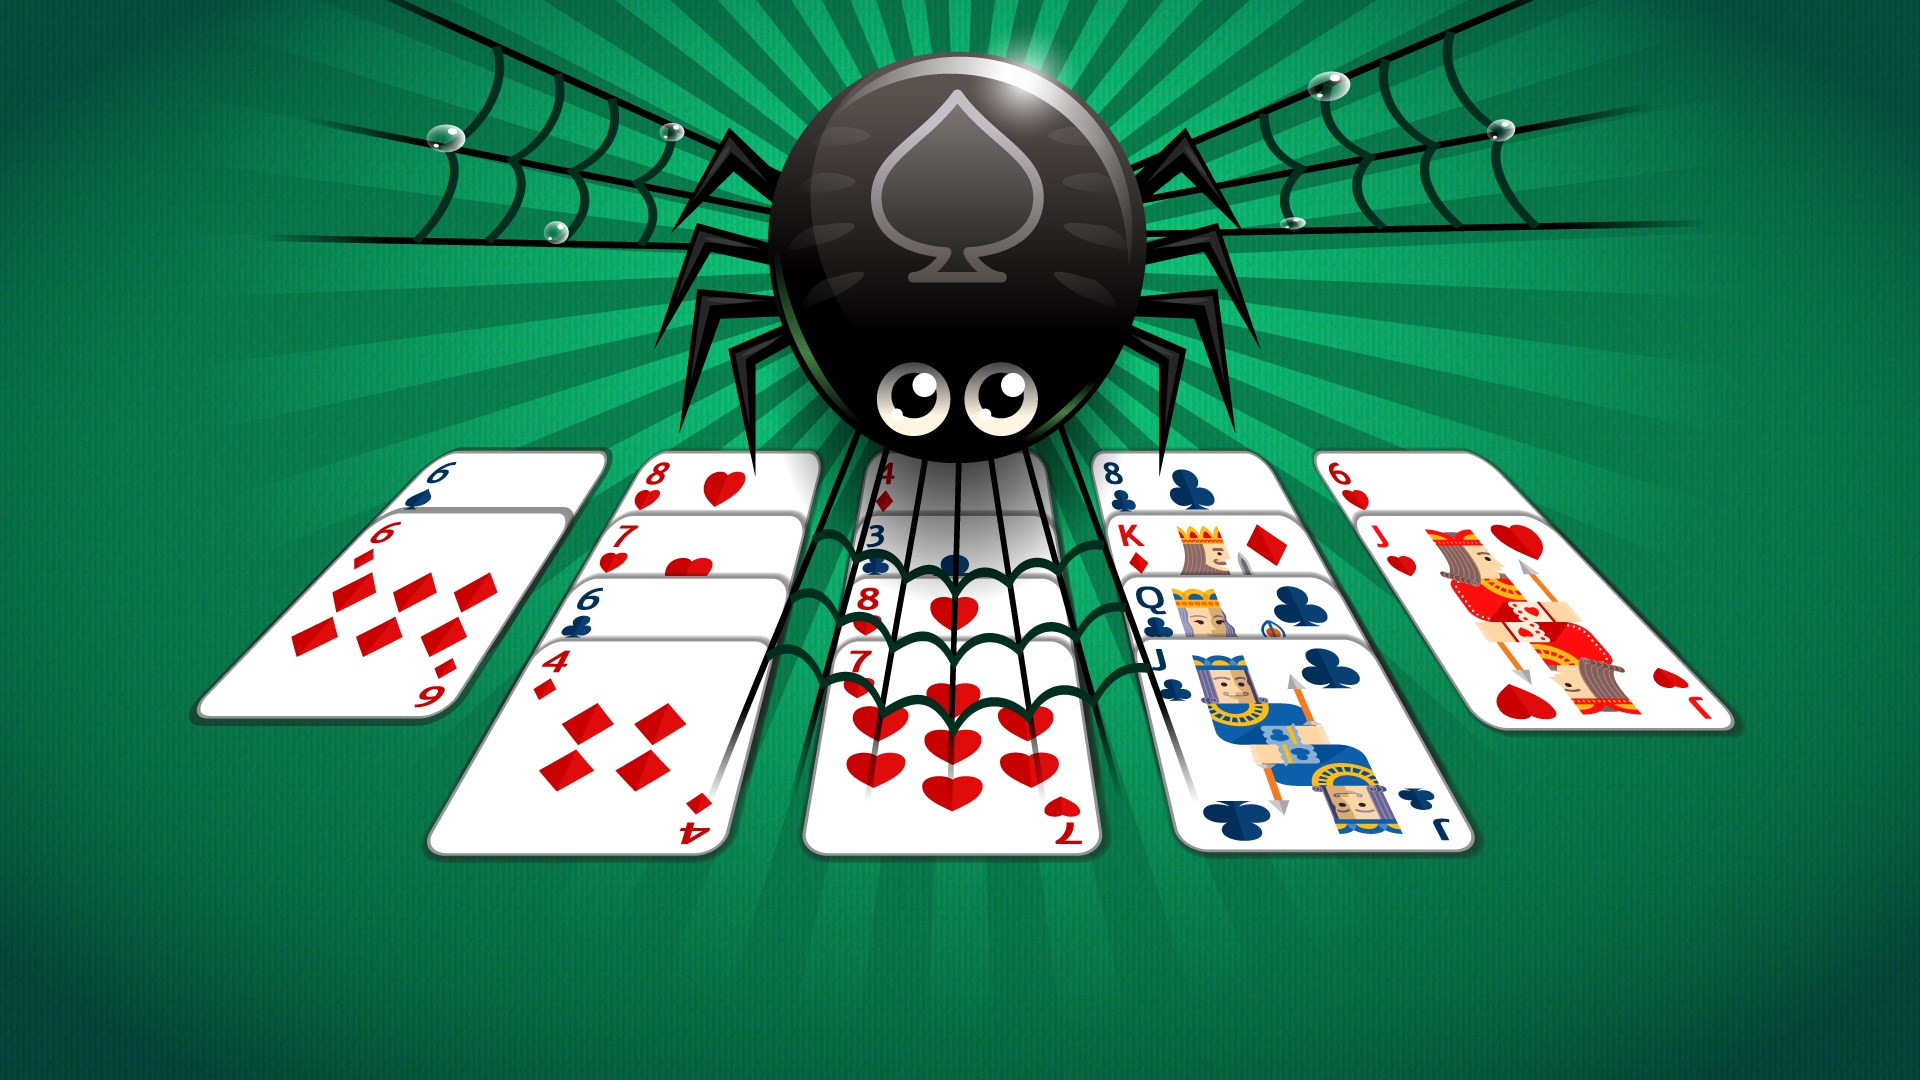 Spider Solitaire 4 suits — play for free